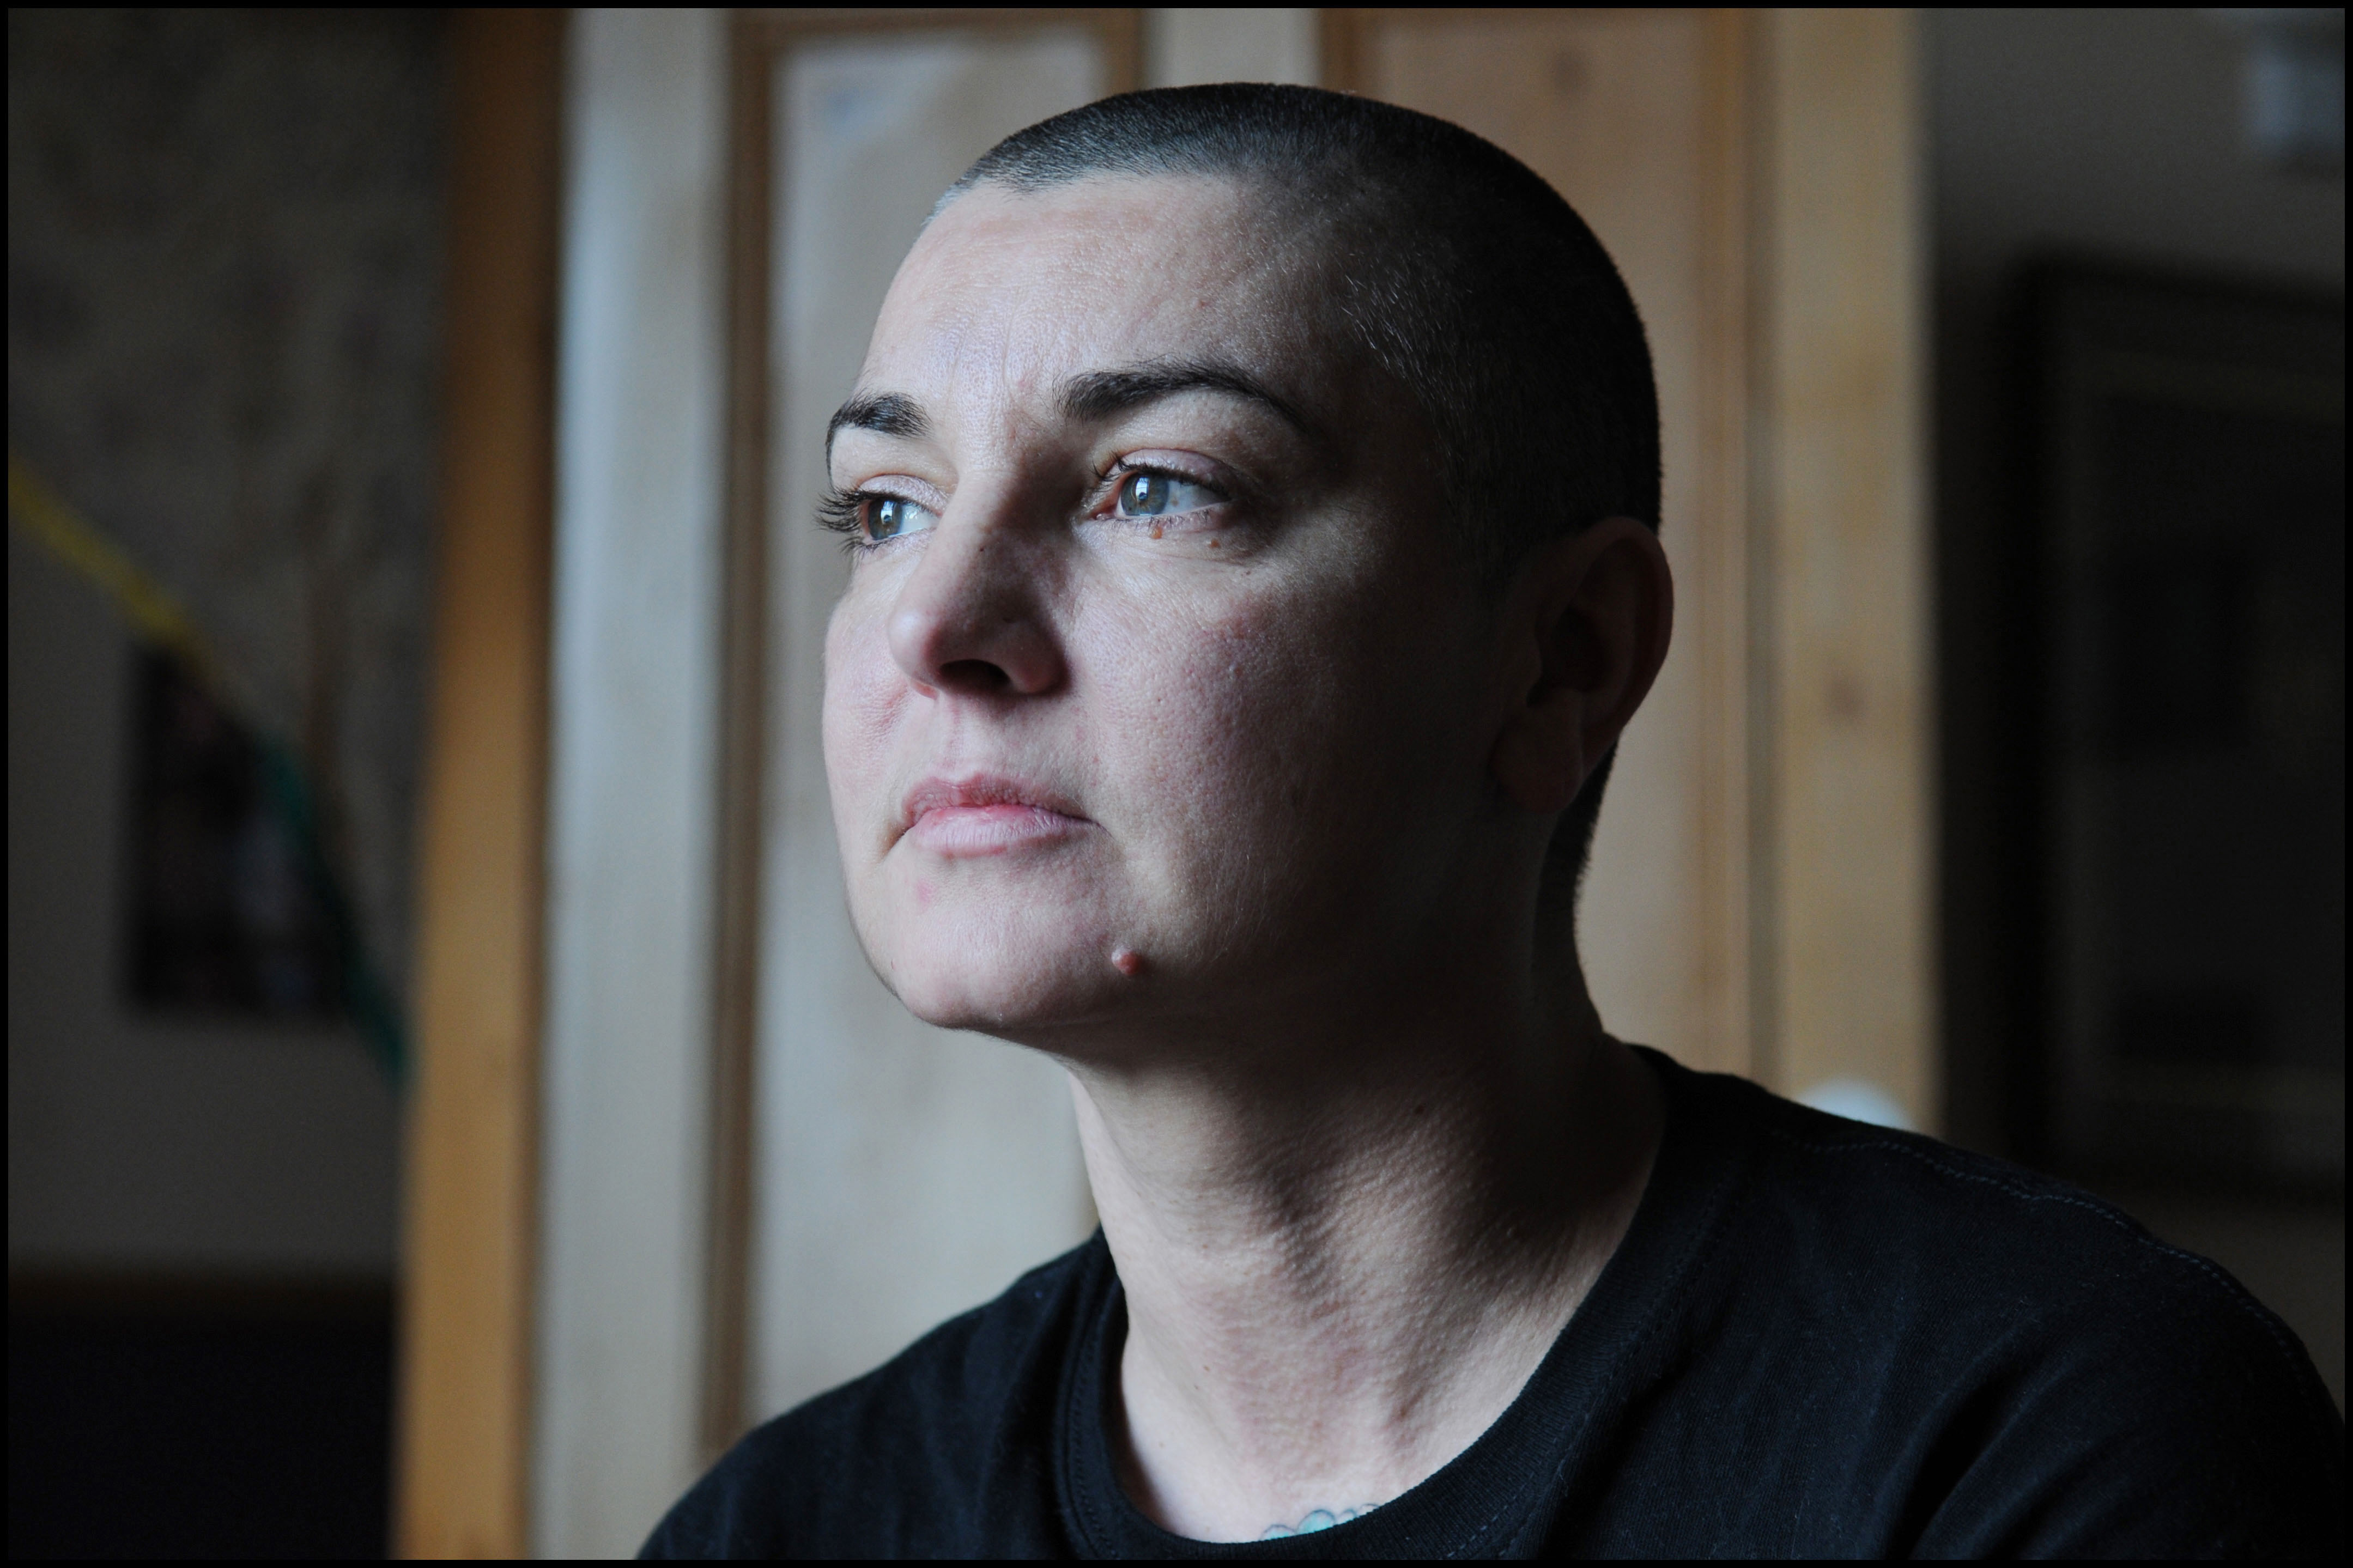 Sinéad O'Connor posing at home in County Wicklow, Ireland on February 3, 2012 | Source: Getty Images